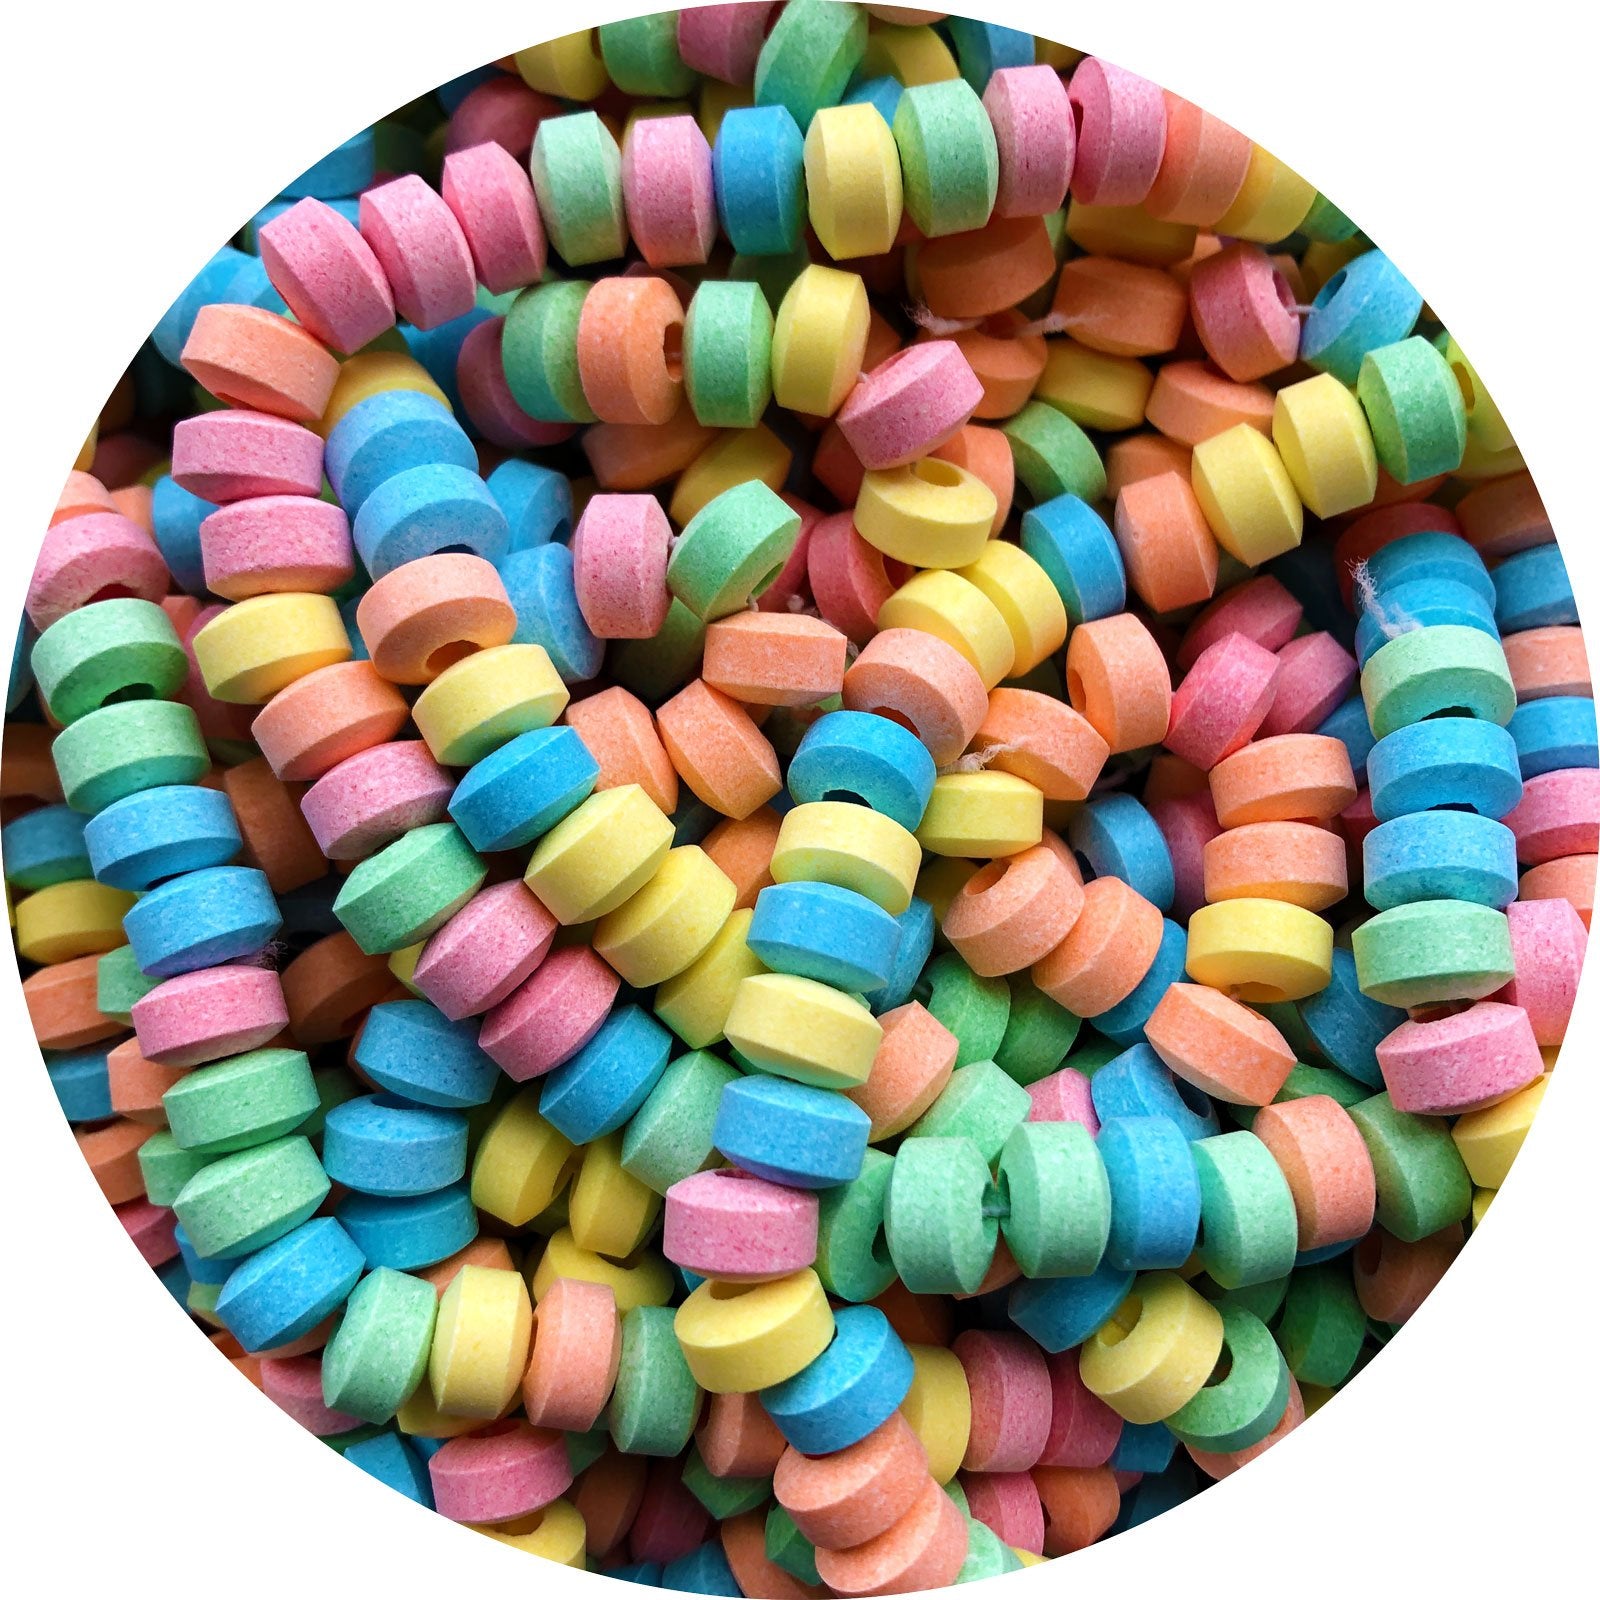 Candy Necklaces - Vegan Sweets